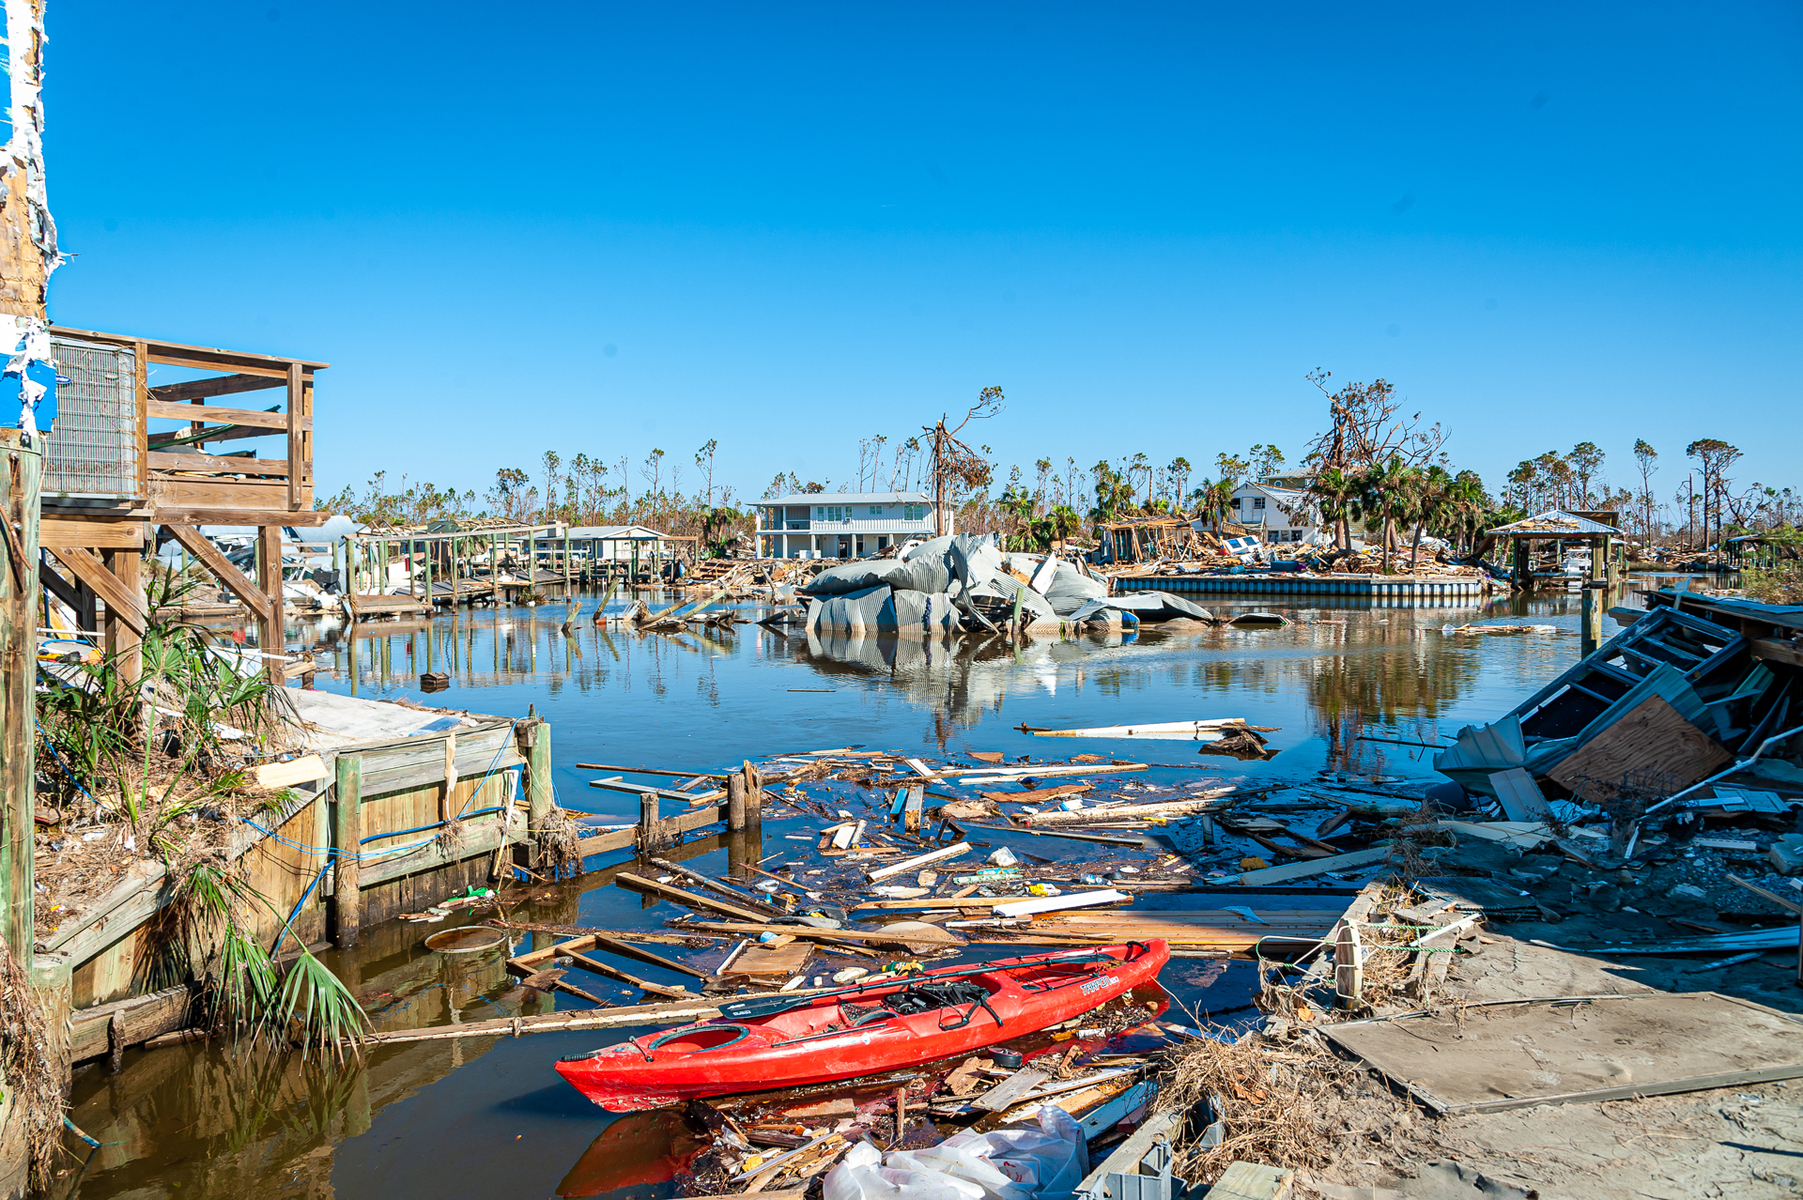 October 18, 2018 - Mexico Beach, FL - The remains of a dock that was heavily damaged by Hurricane Michael sits near the beach on 9 May 2018 in Mexico Beach, Florida. The strongest storm on record to ever make landfall in Northwest Florida, and the fourth most powerful to ever hit the continental United States.